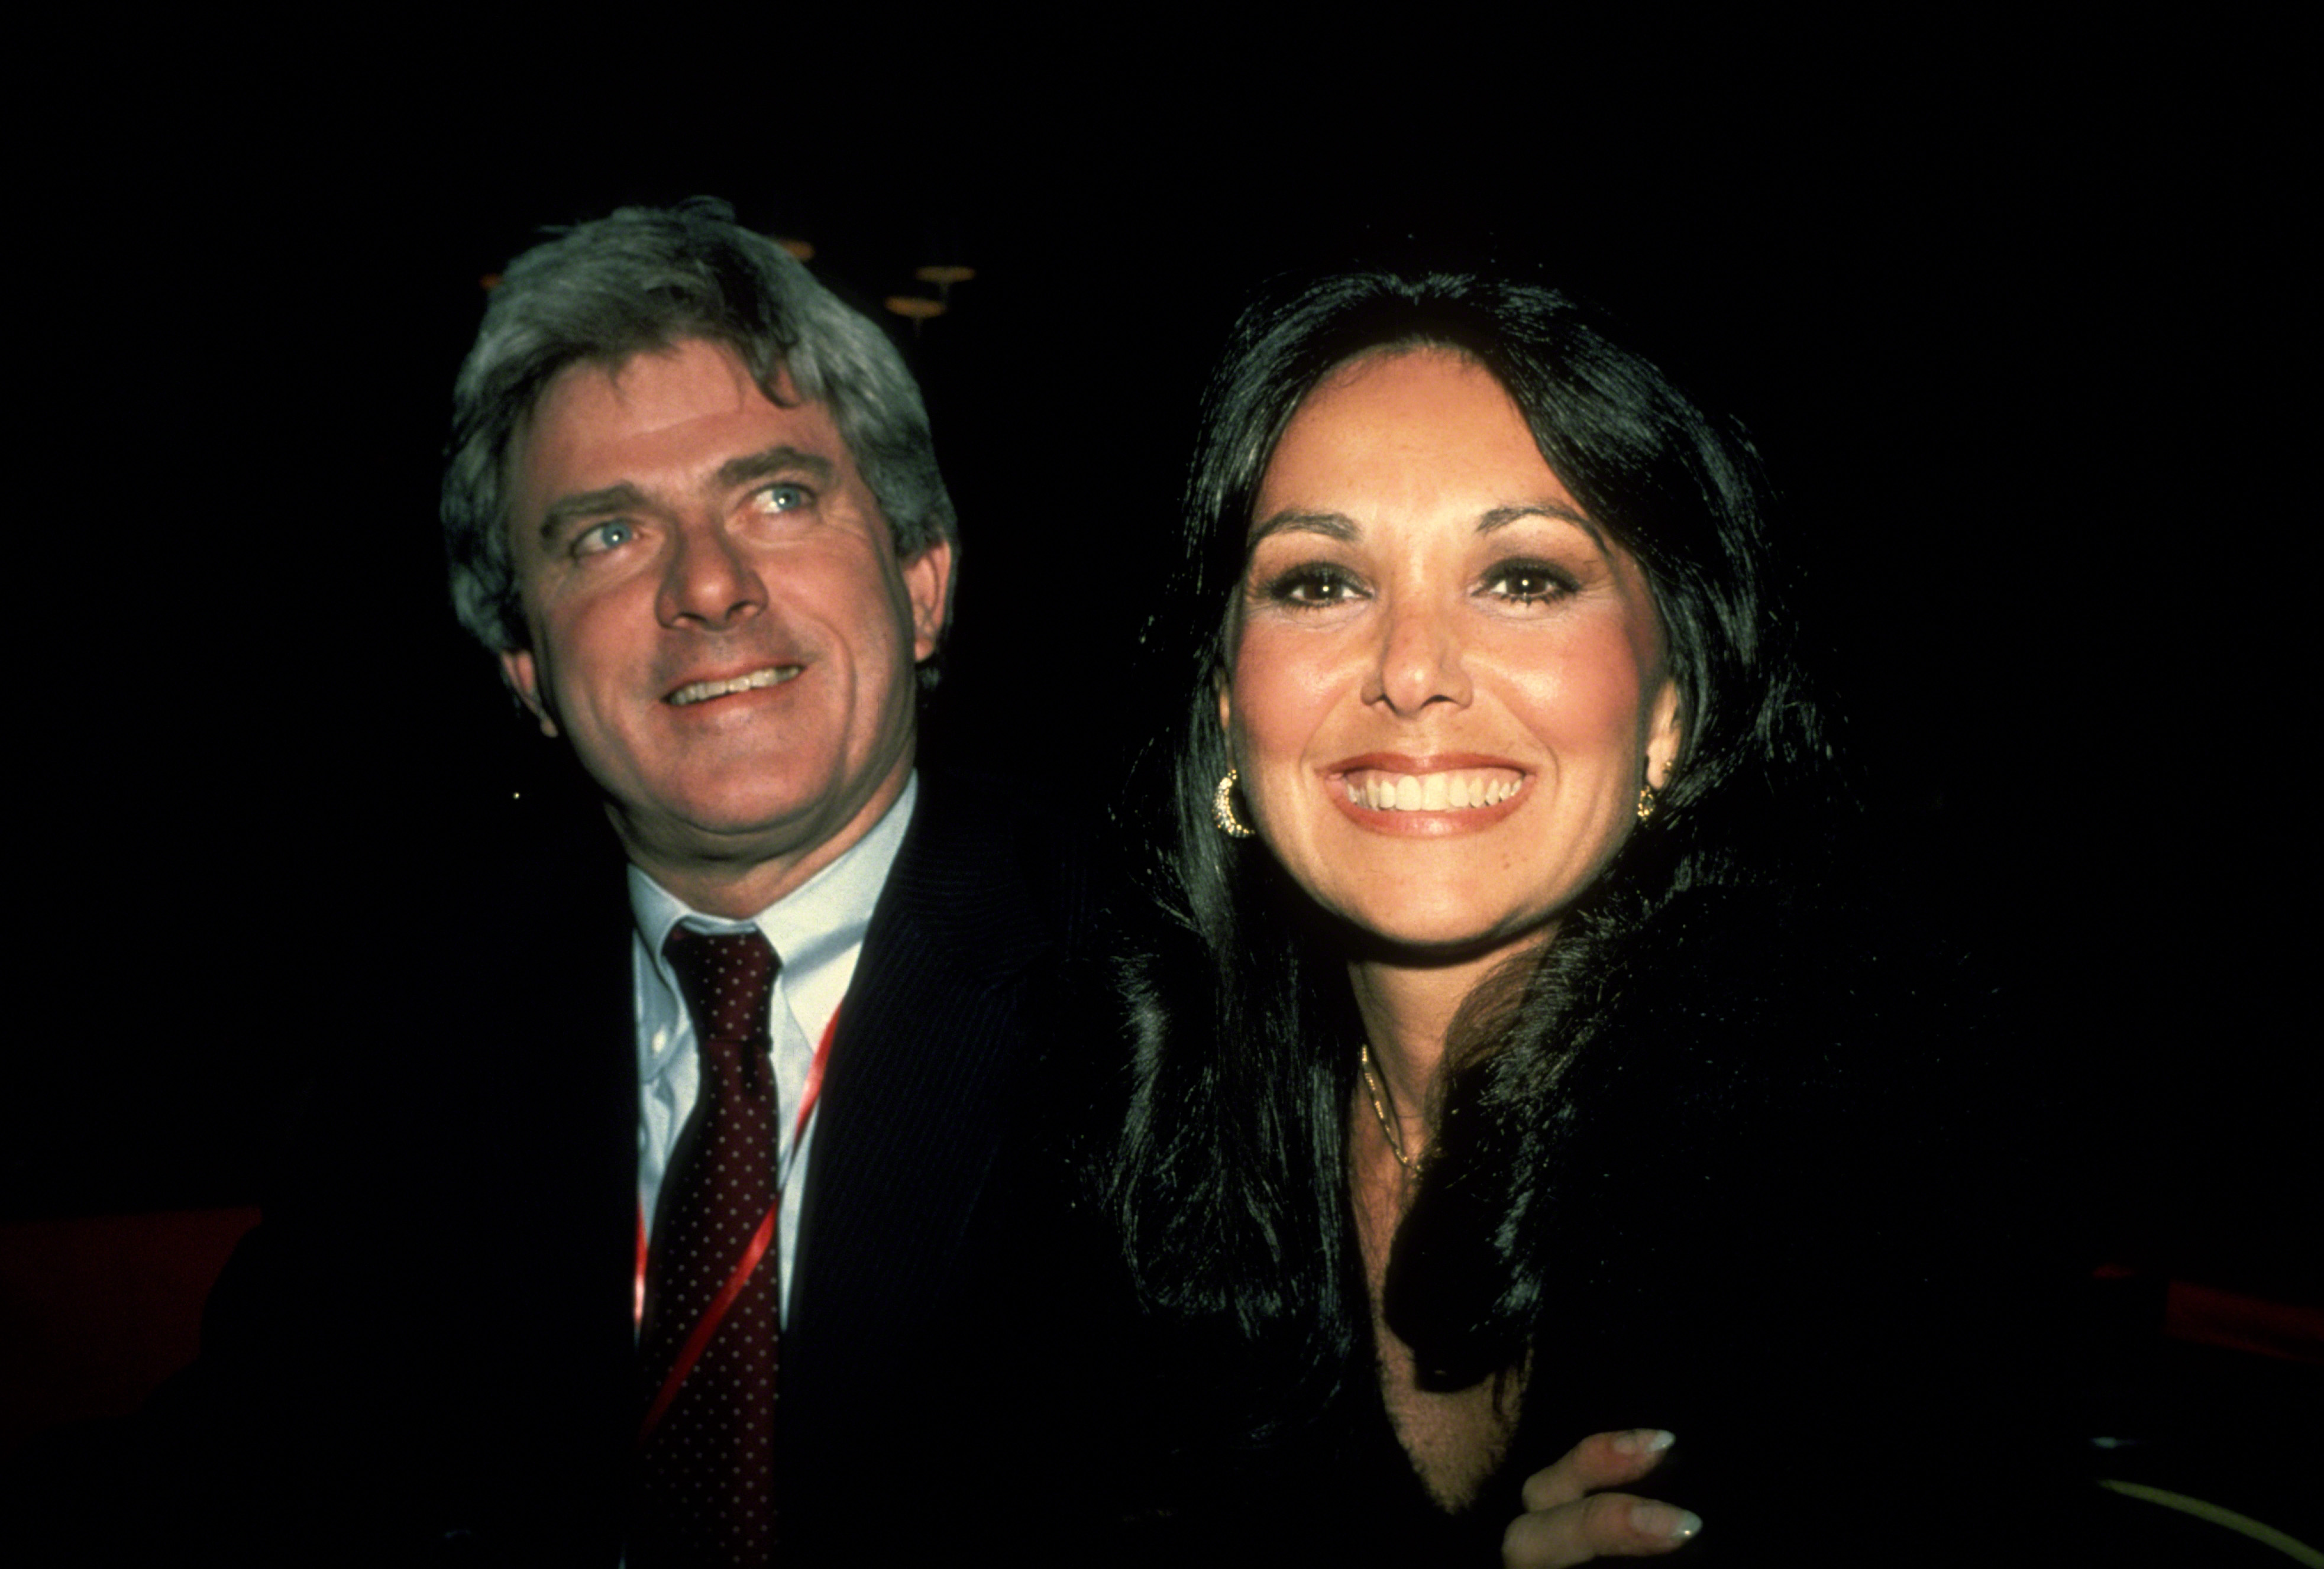 Phil Donahue and Marlo Thomas circa 1979, in New York City | Source: Getty Images